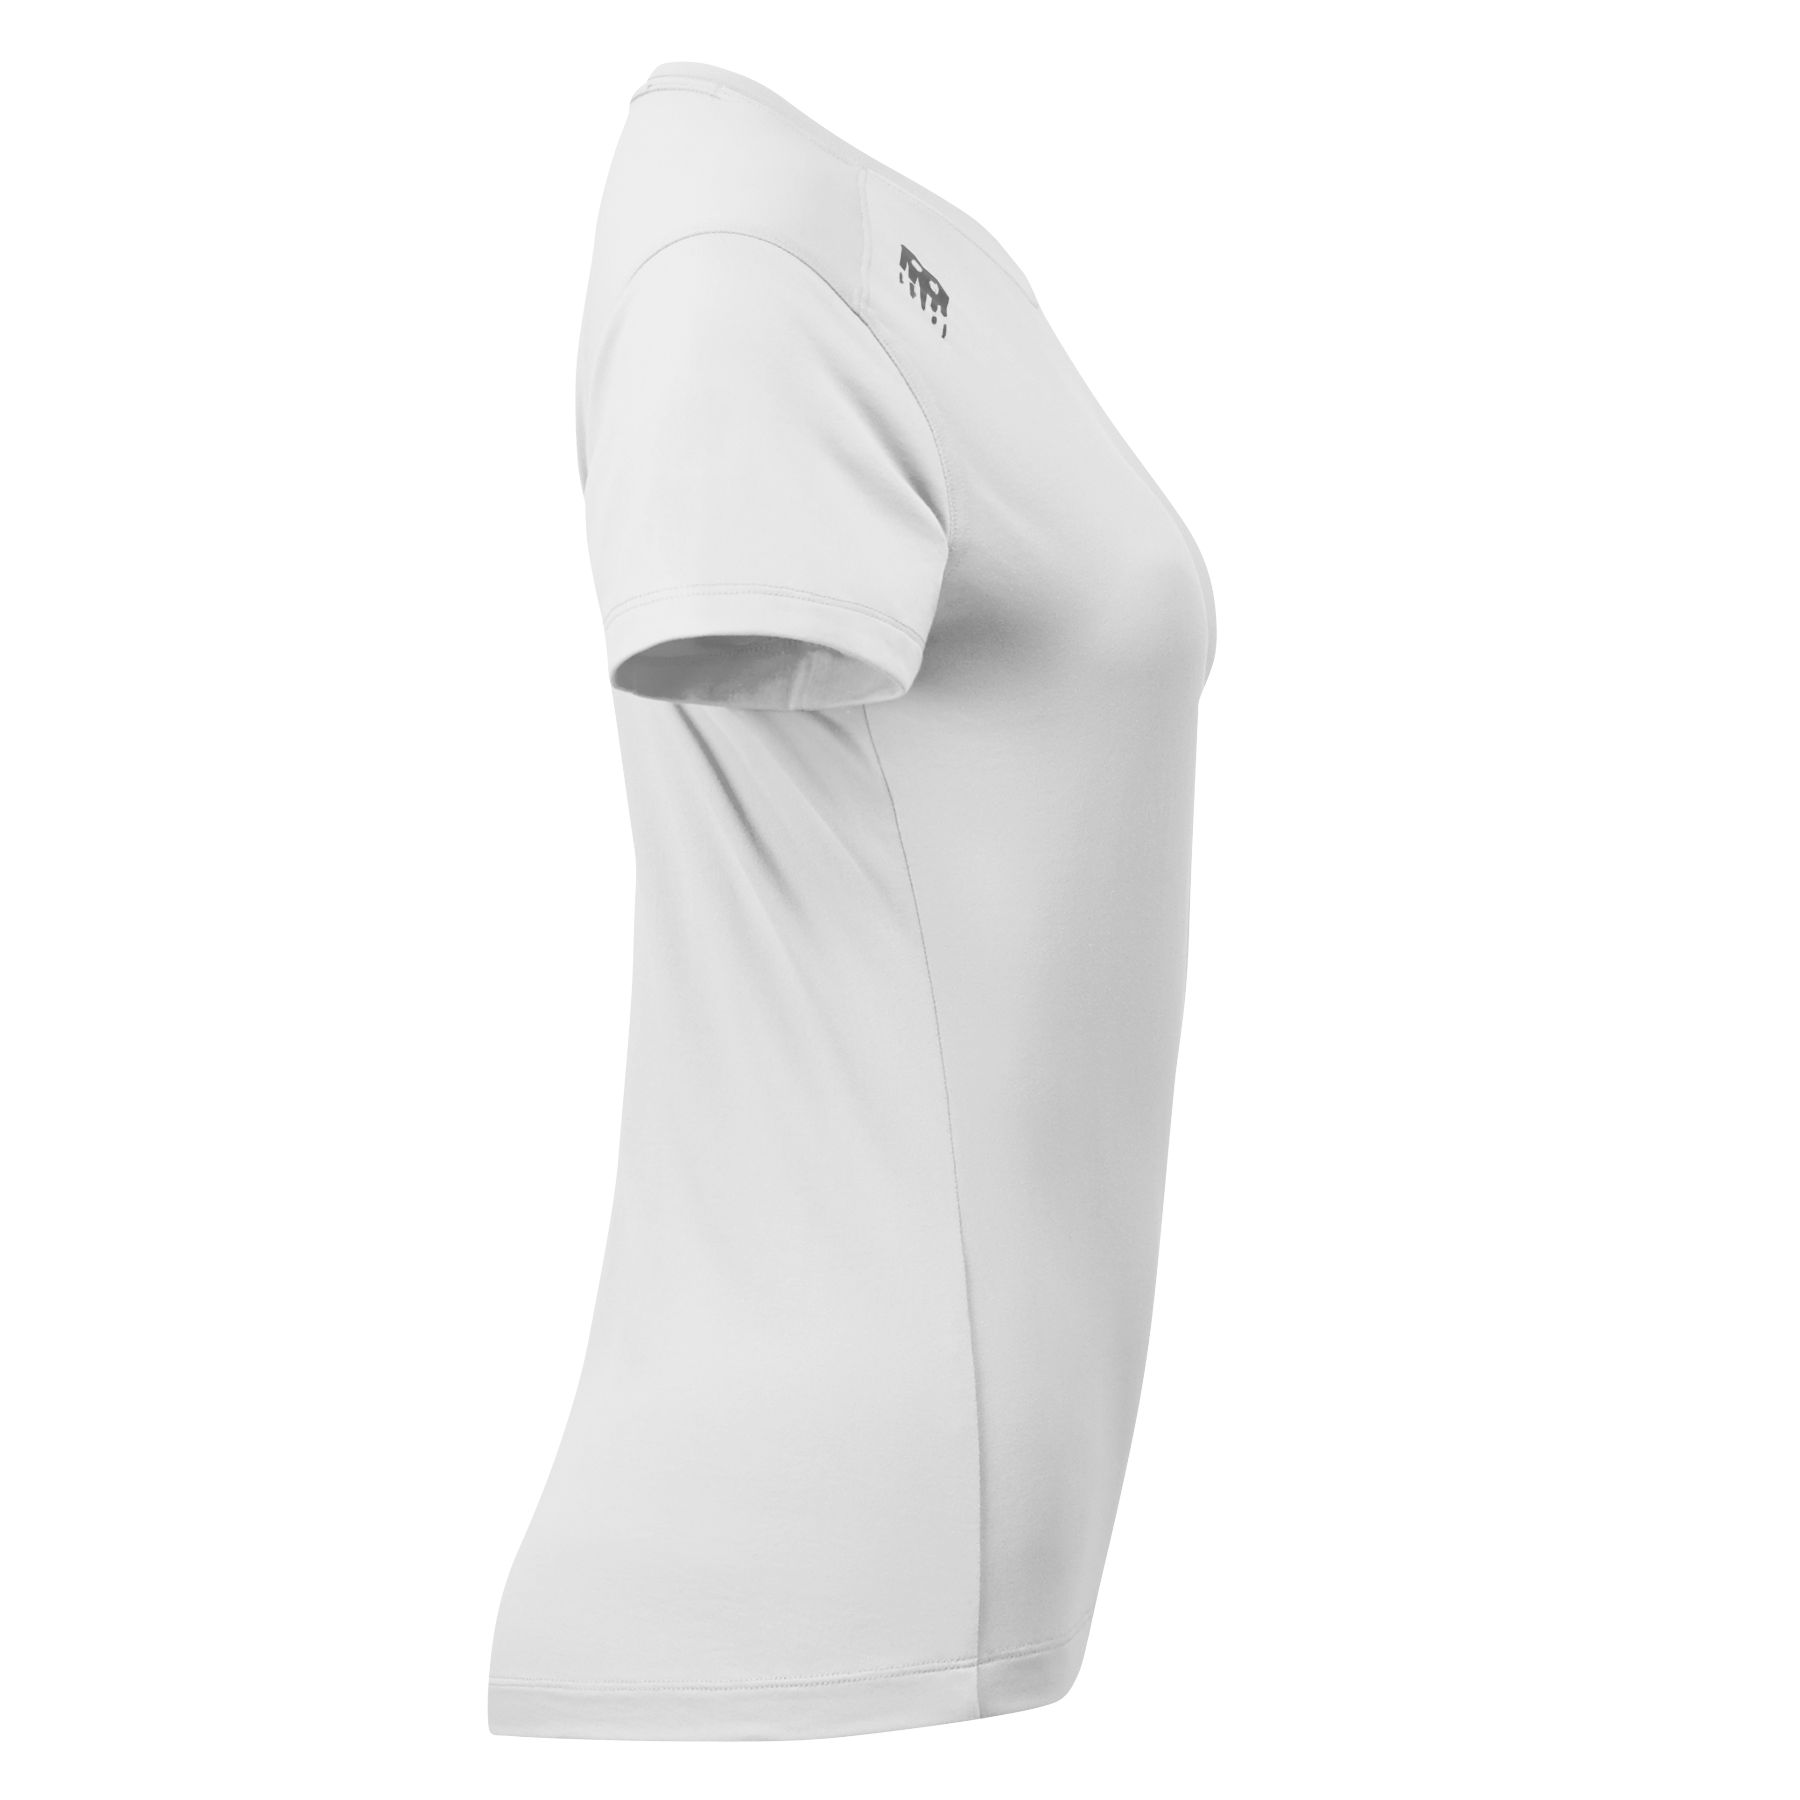 NB Women's SS Tech Tee, White image number 3